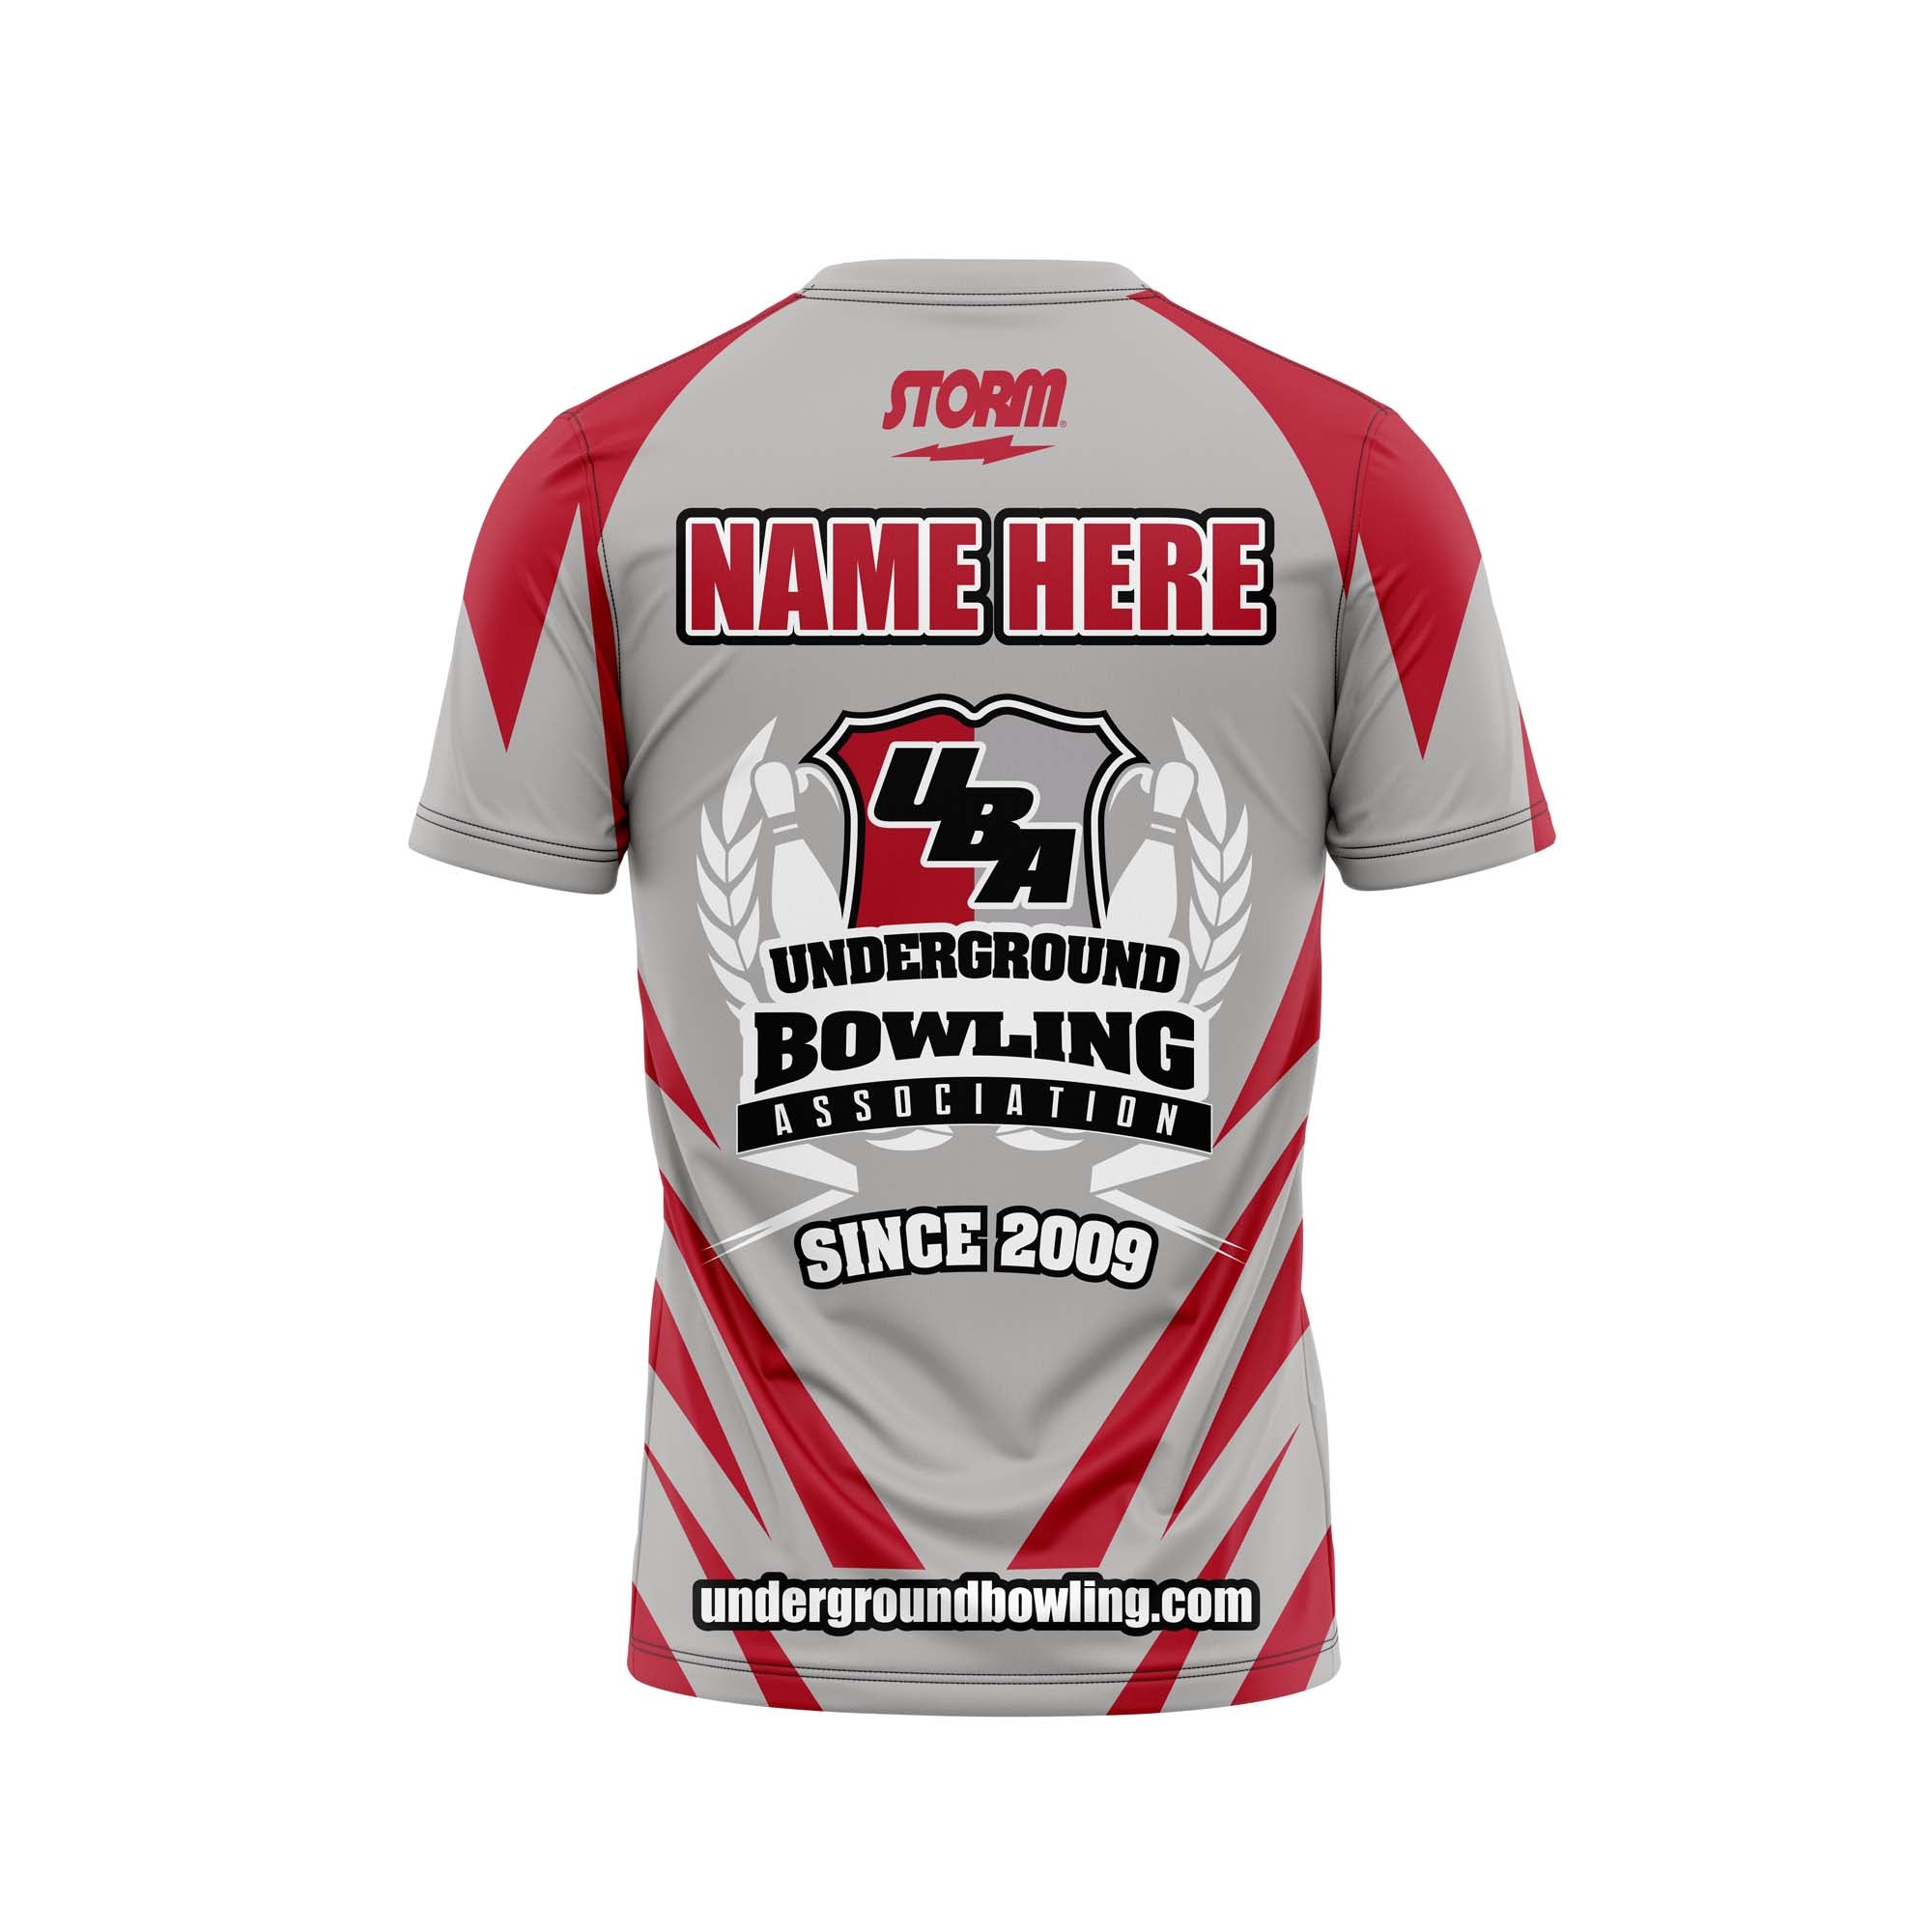 Insurgents Grey / Red Jersey